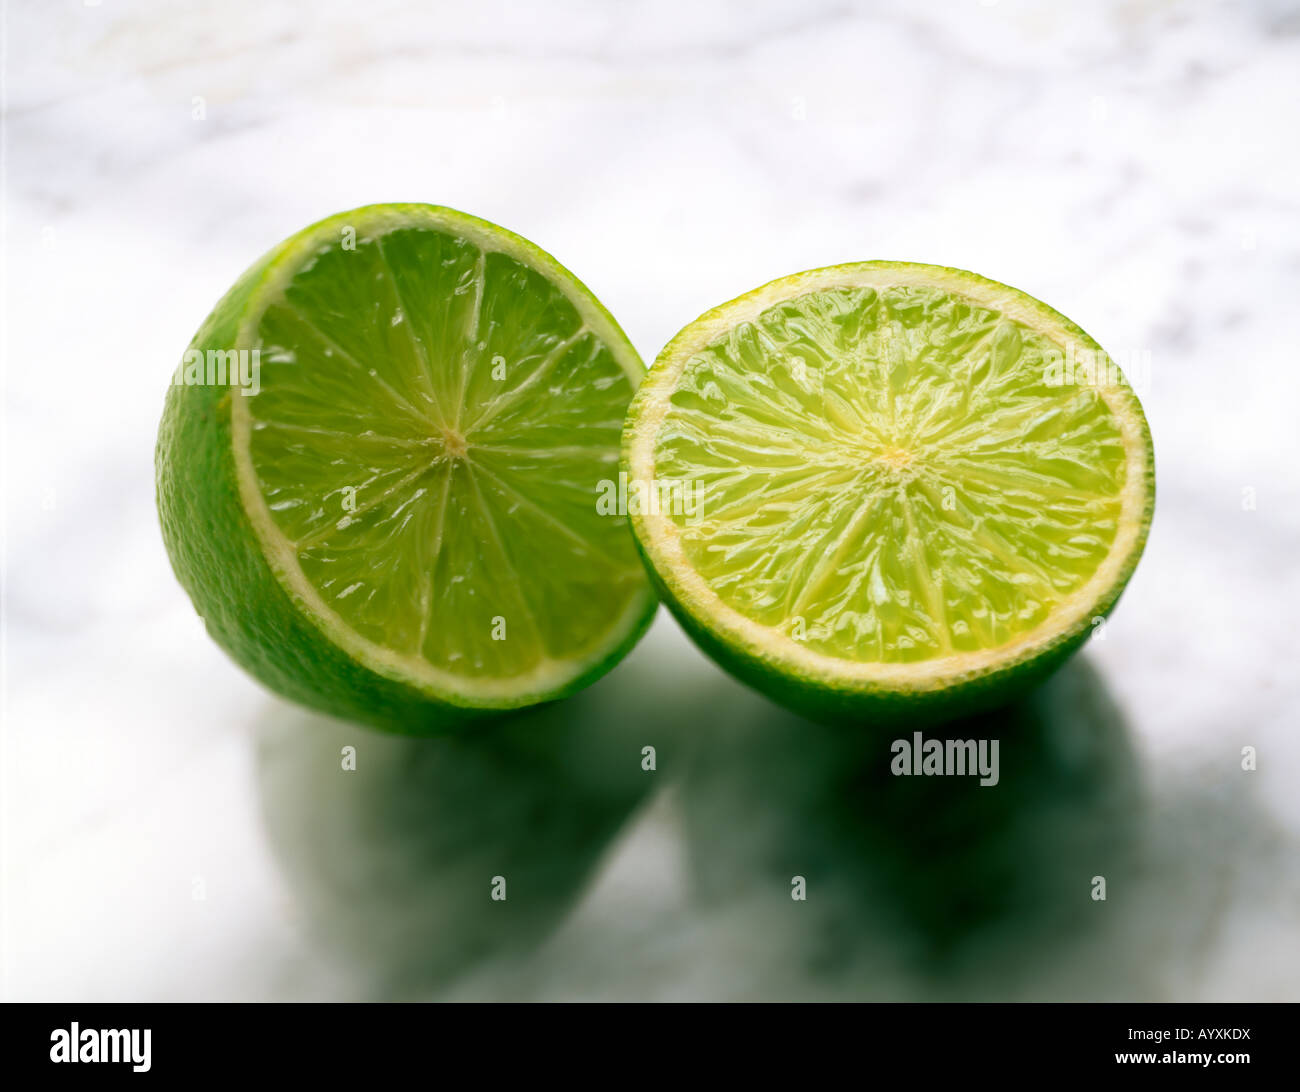 SHOT OF A WHOLE LIME CUT IN HALF ON A MARBLE SURFACE Stock Photo